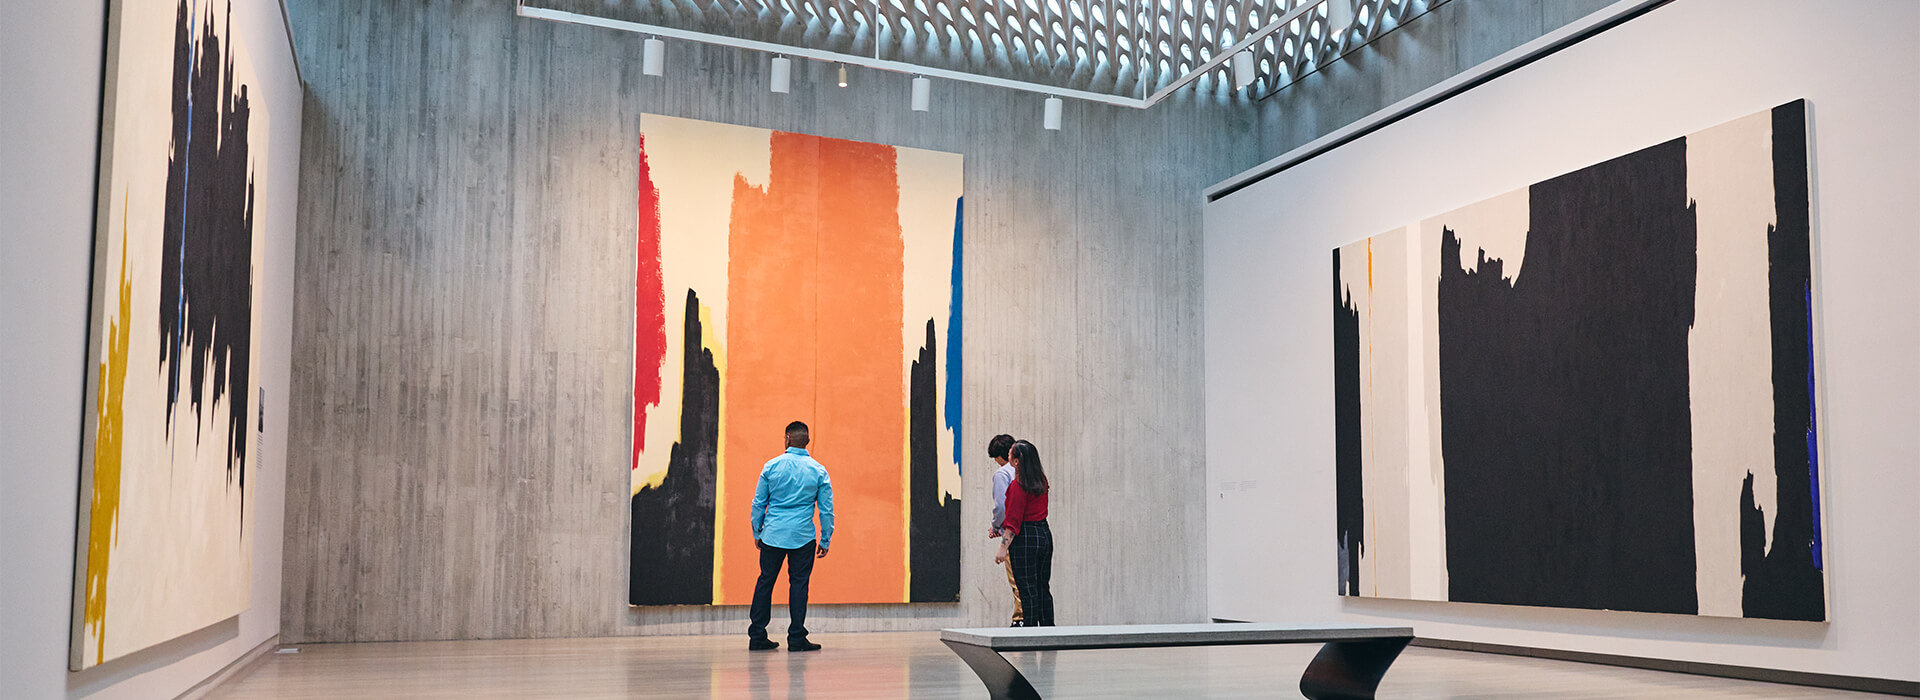 A family stands in a gallery with large, abstract paintings